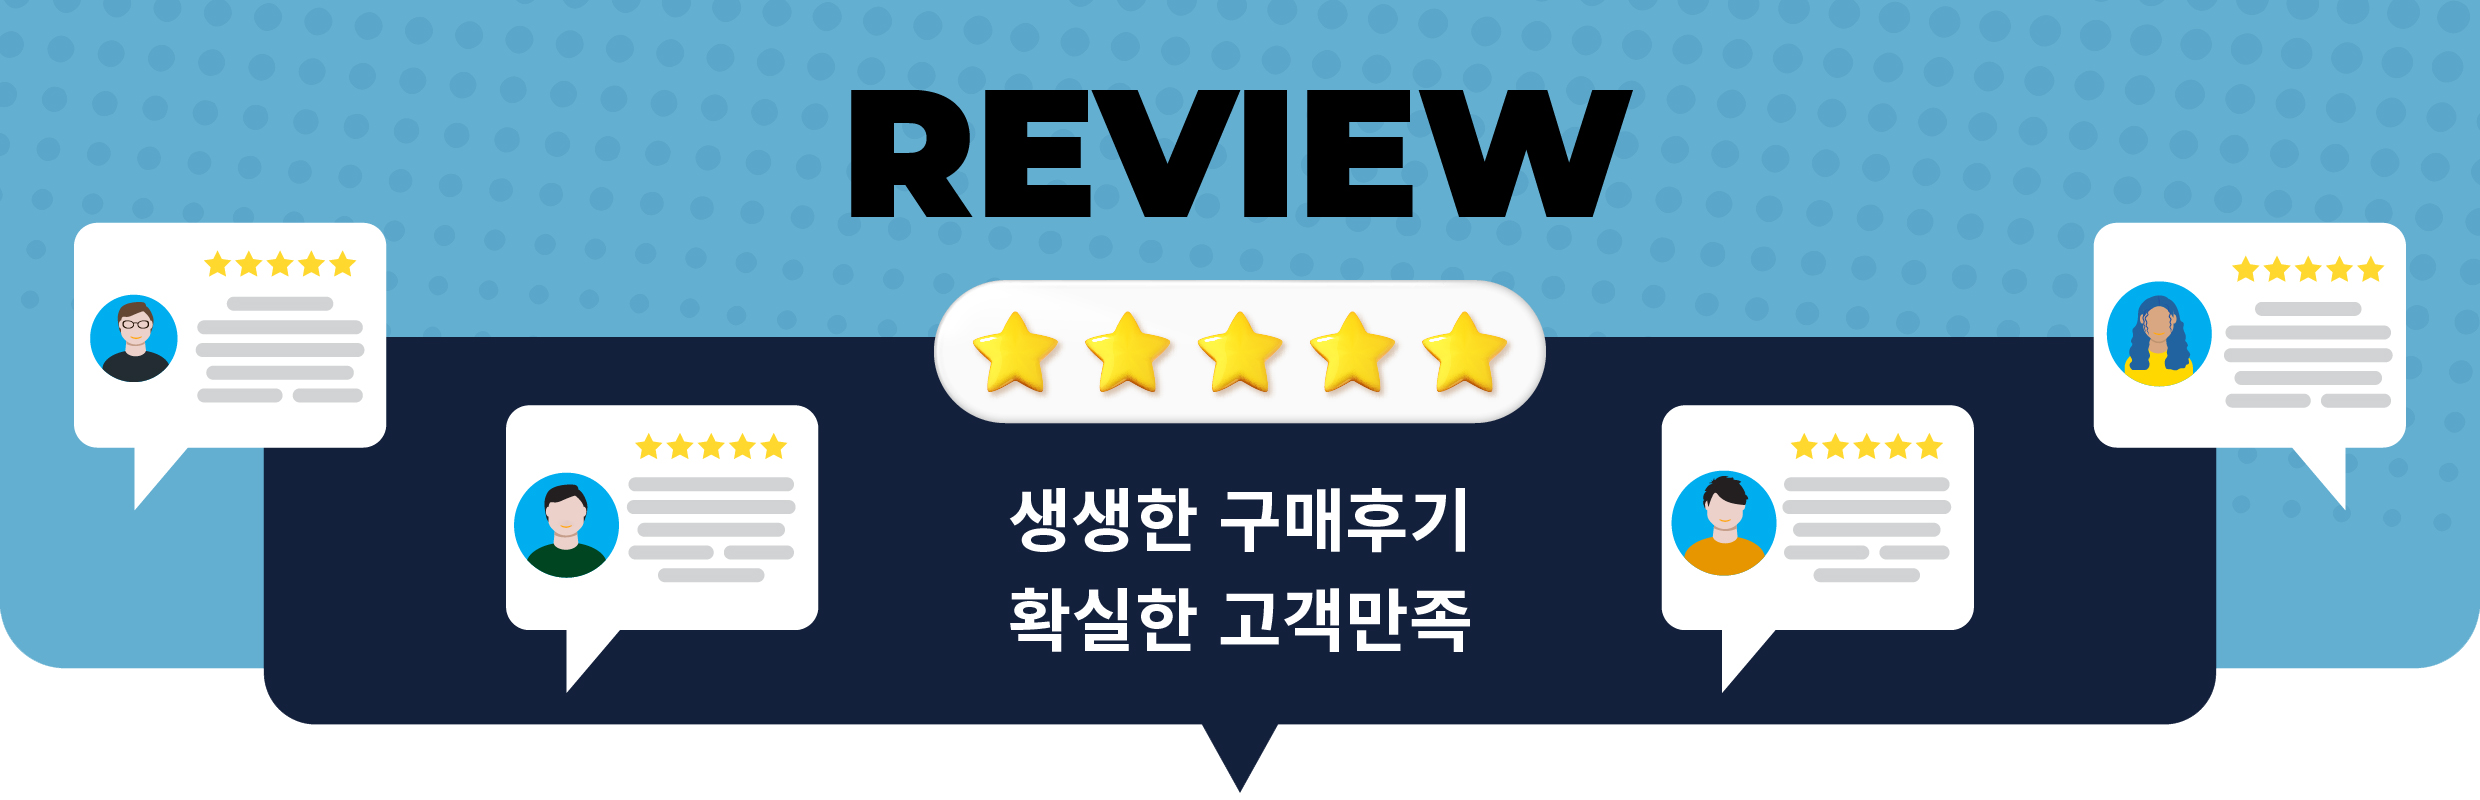 reviewbanner2480x800_165513.png